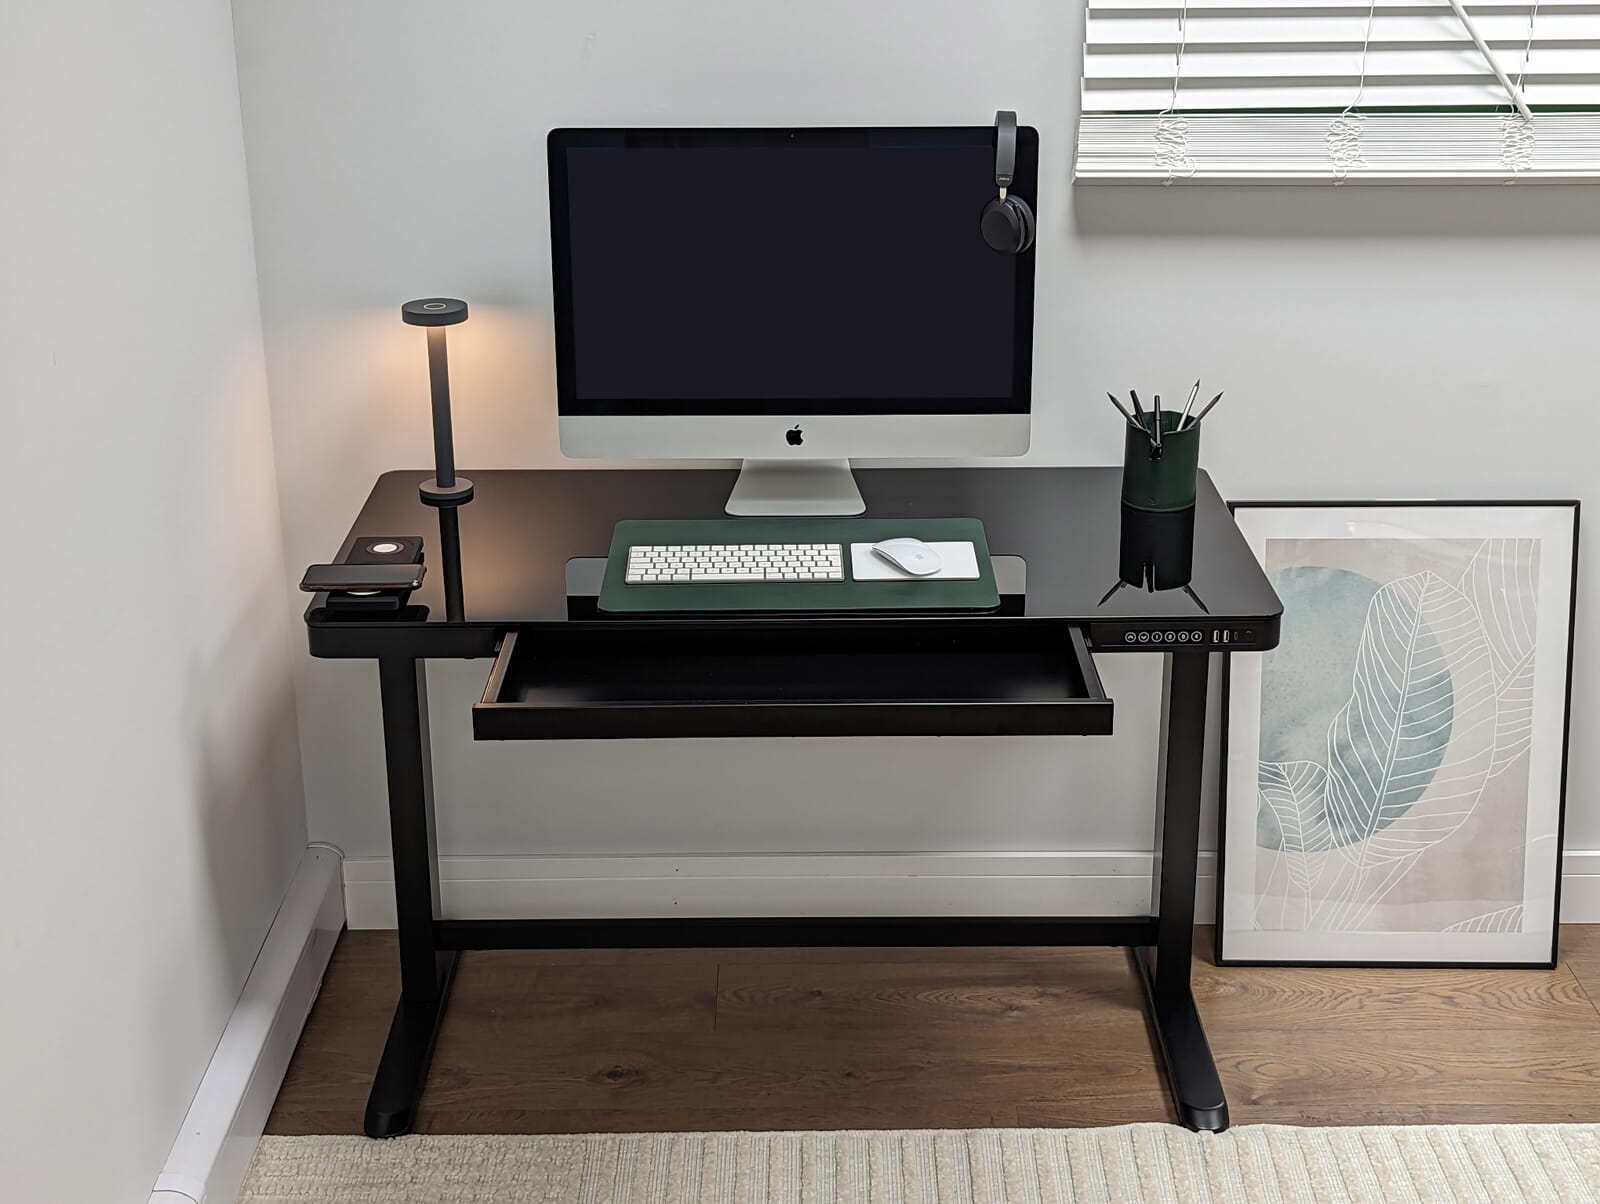 The Oskar Height Adjustable Desk from Koble Designs, a retro design with a mahogany effect desktop and black frame finish. Sit or stand at your chosen height from 75cm to 125cm. Technical features include 4 memory settings, 1 USB port, and 1 USB-C port.